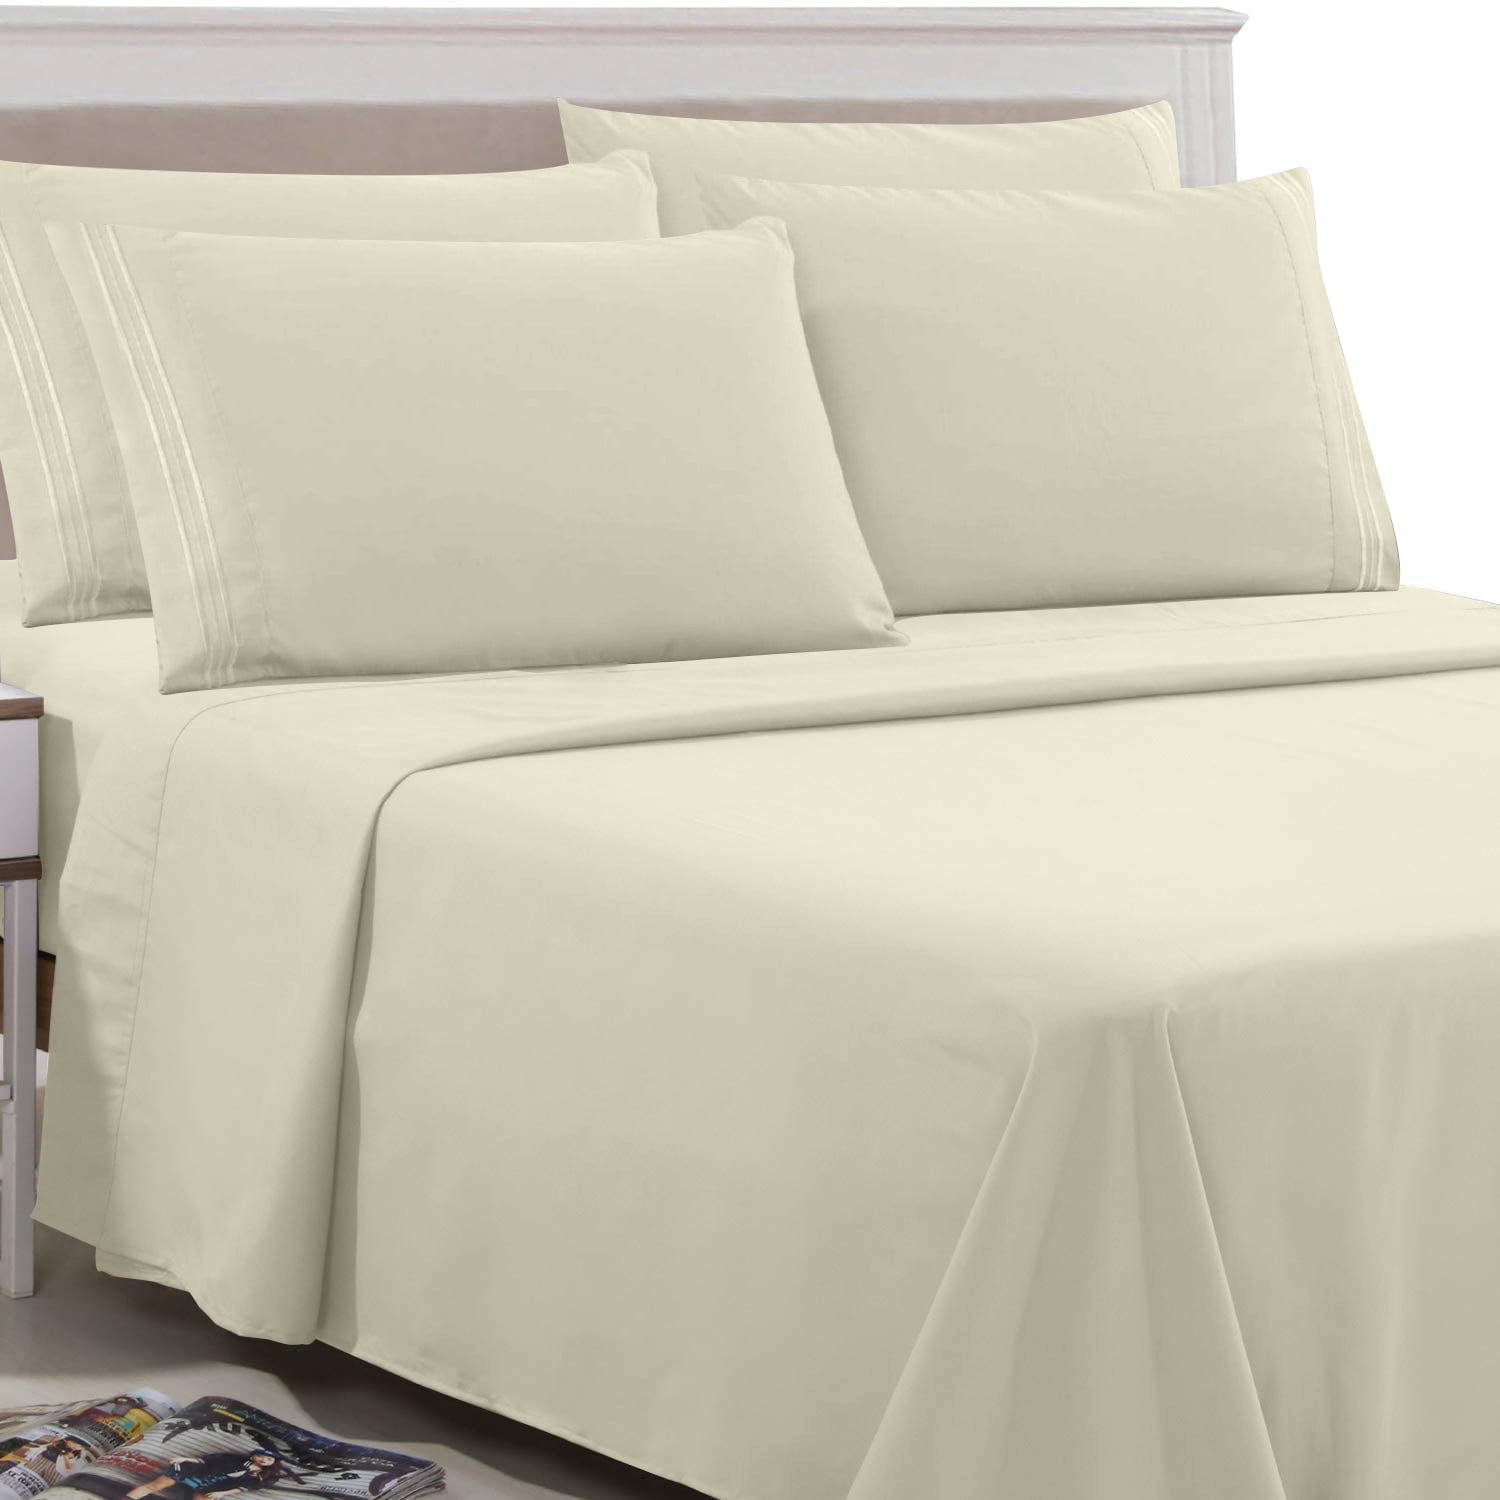 Details about   SATIN FITTED SHEET ELEGANT SOFT SILKY BED SOLID WRINKLE FREE DEEP POCKET NEW